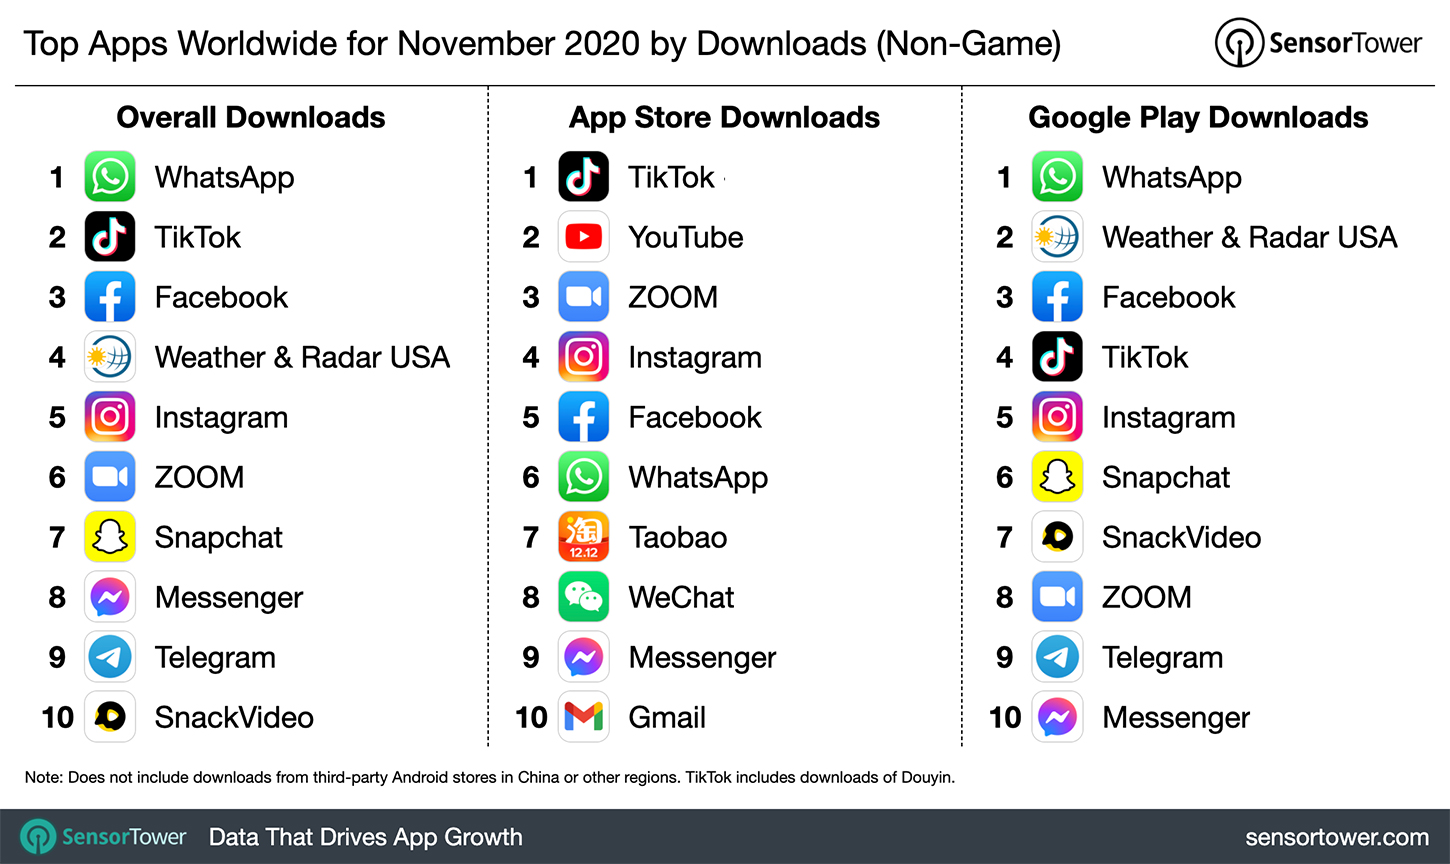 Top Apps Worldwide for November 2020 by Downloads